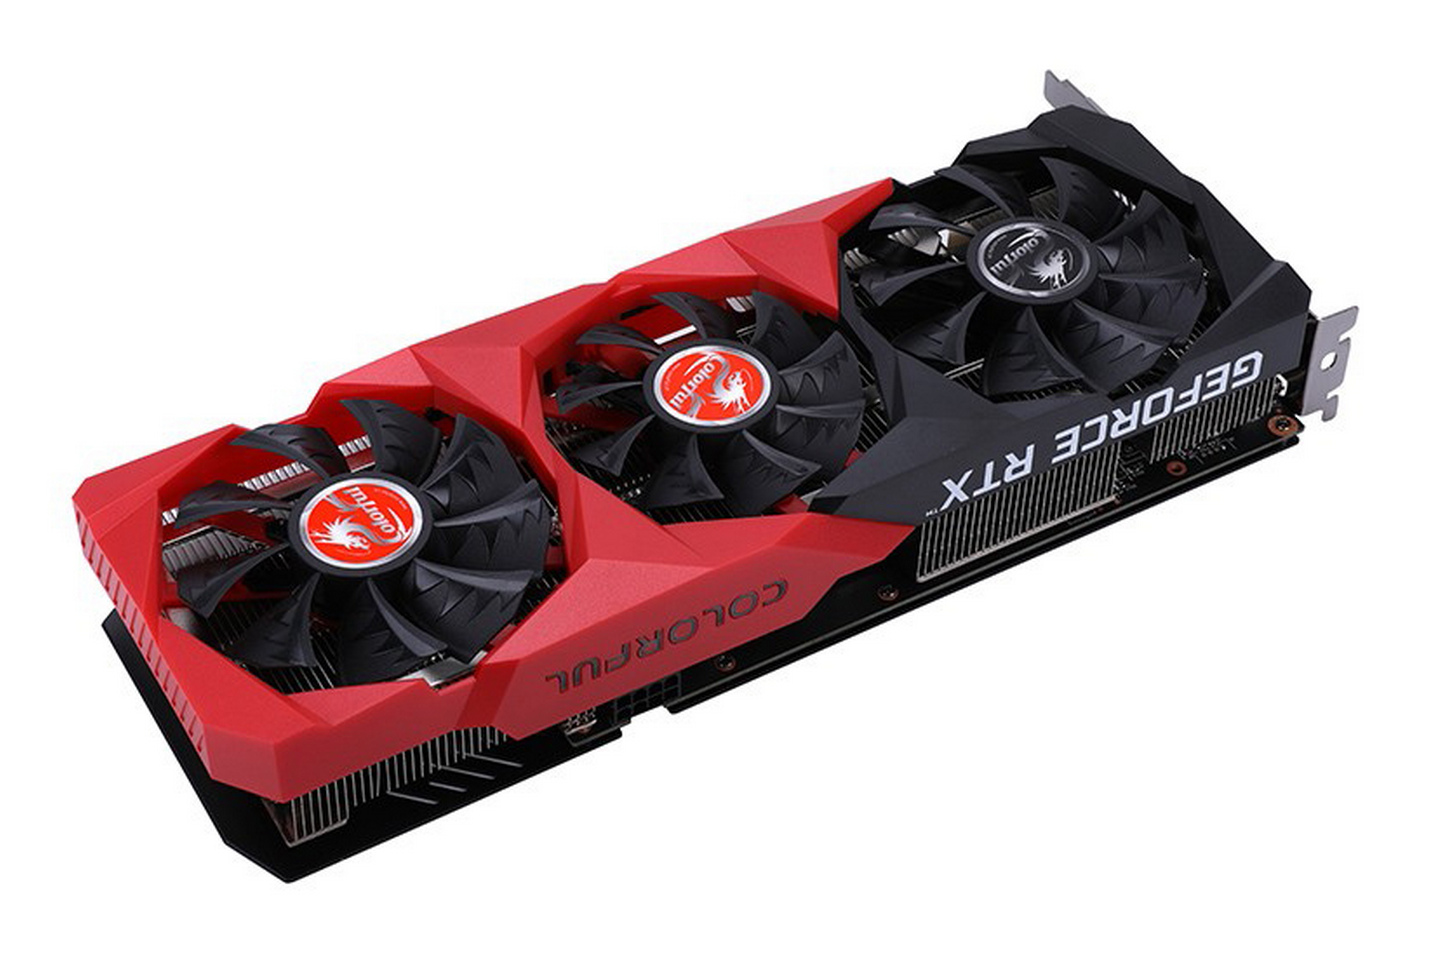 Colorful geforce rtx 3060 12. 3060 Colorful 12gb. 3060 12 ГБ colorful GEFORCE. Colorful RTX 3060. RTX 3090 colorful.